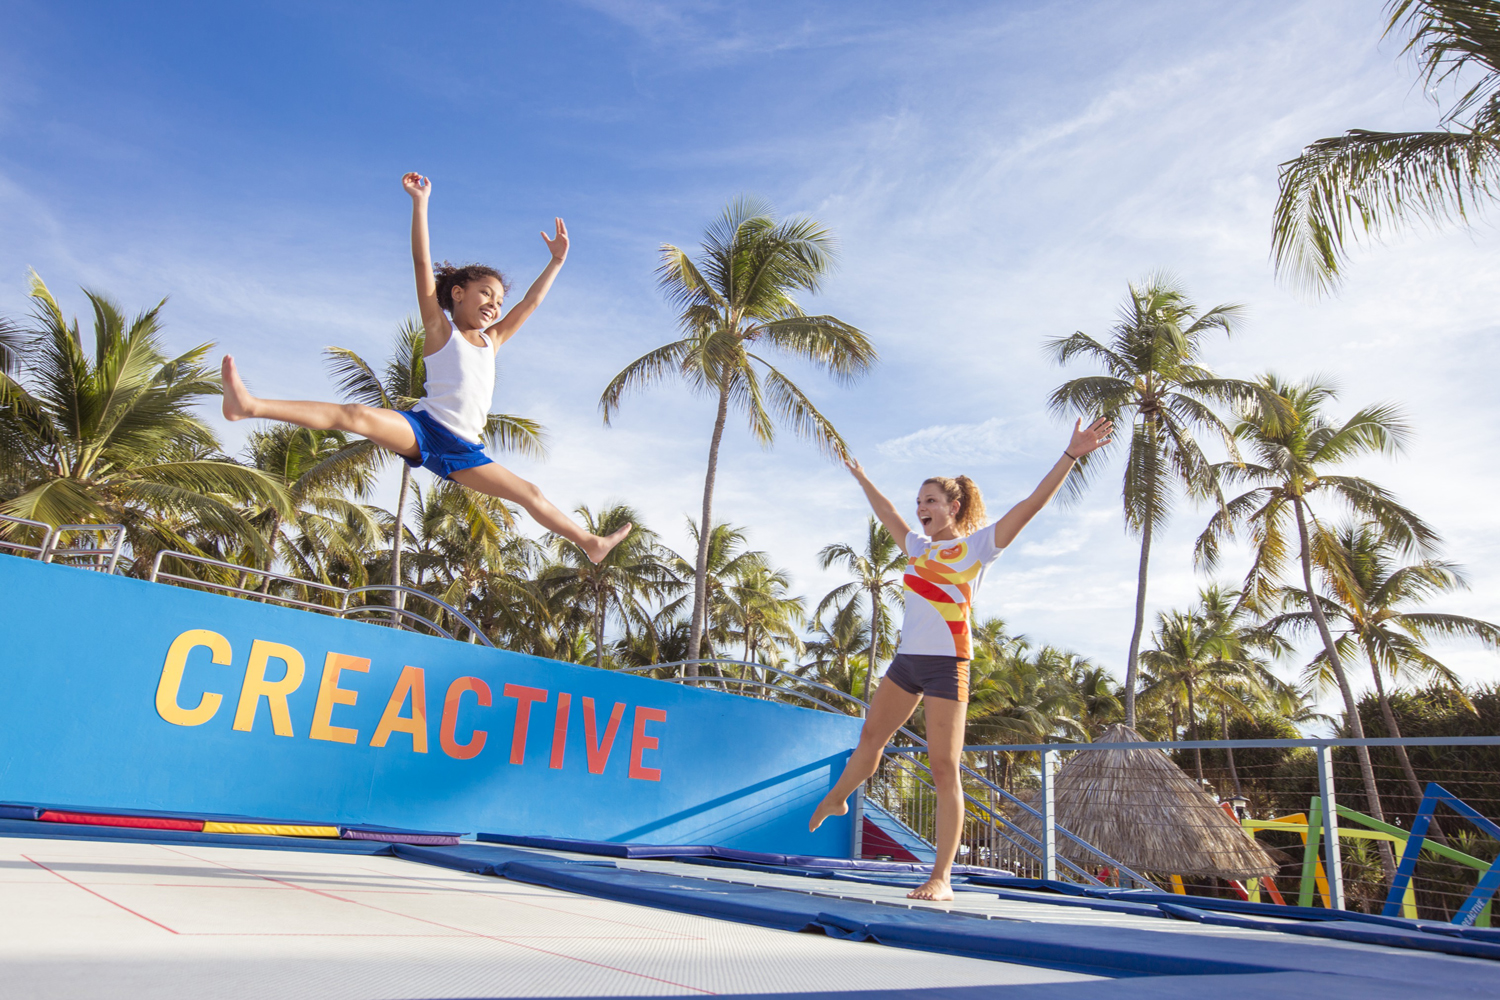 Club Med offers Creactive facilities where kids can use a trampoline, juggle or do a trapeze act.